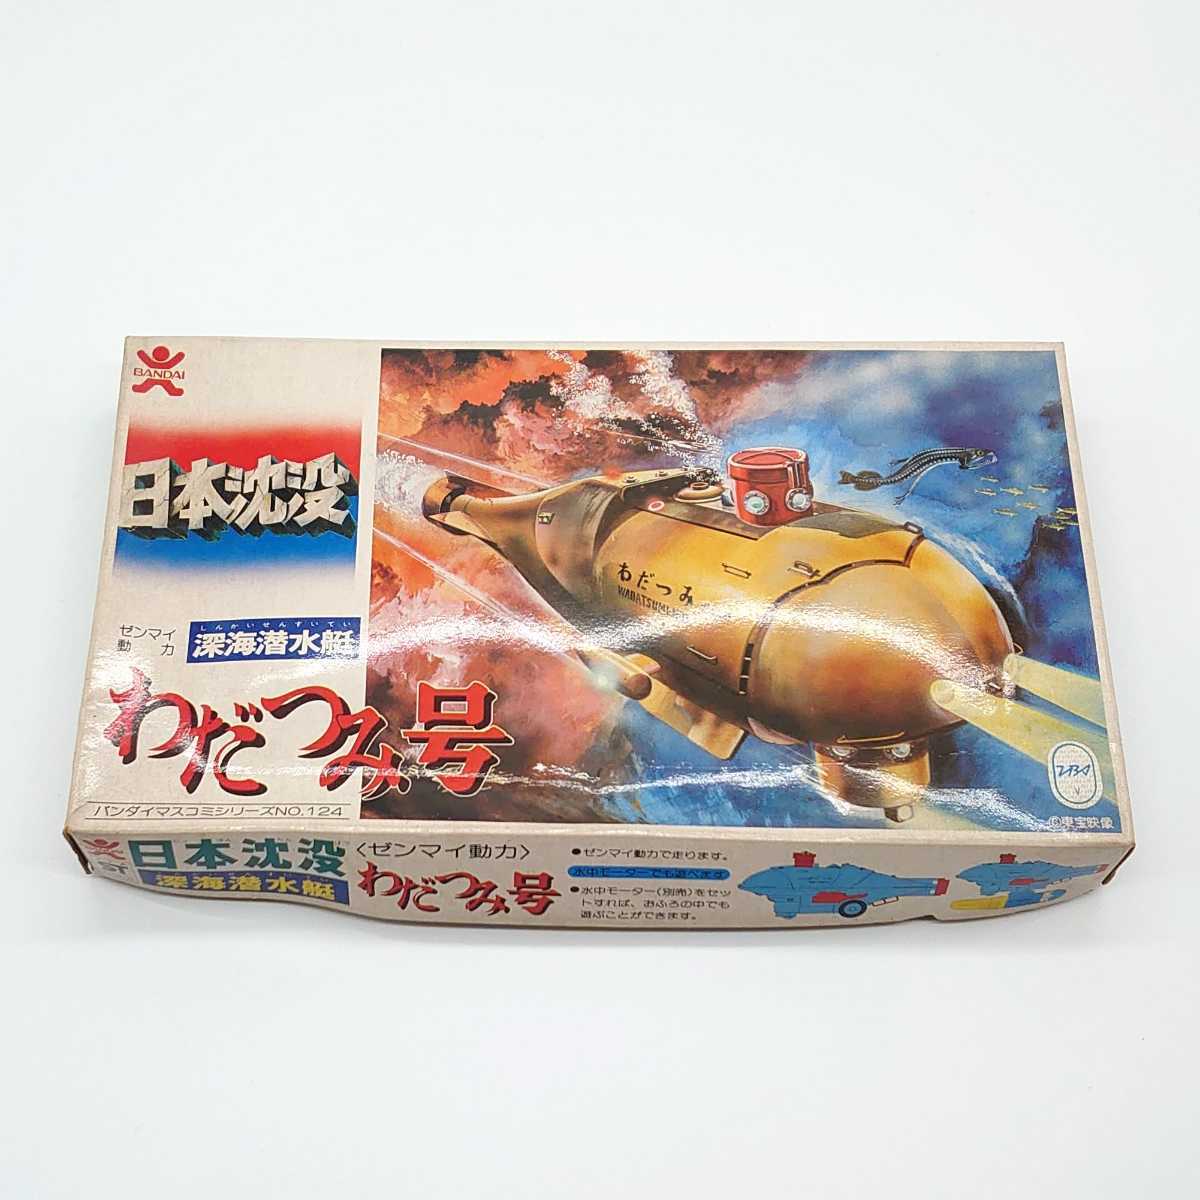  Japan .. new sea . water boat .... number zen my power mass communication series old Bandai plastic model kit Showa Retro that time thing beautiful goods not yet constructed tp-22x762